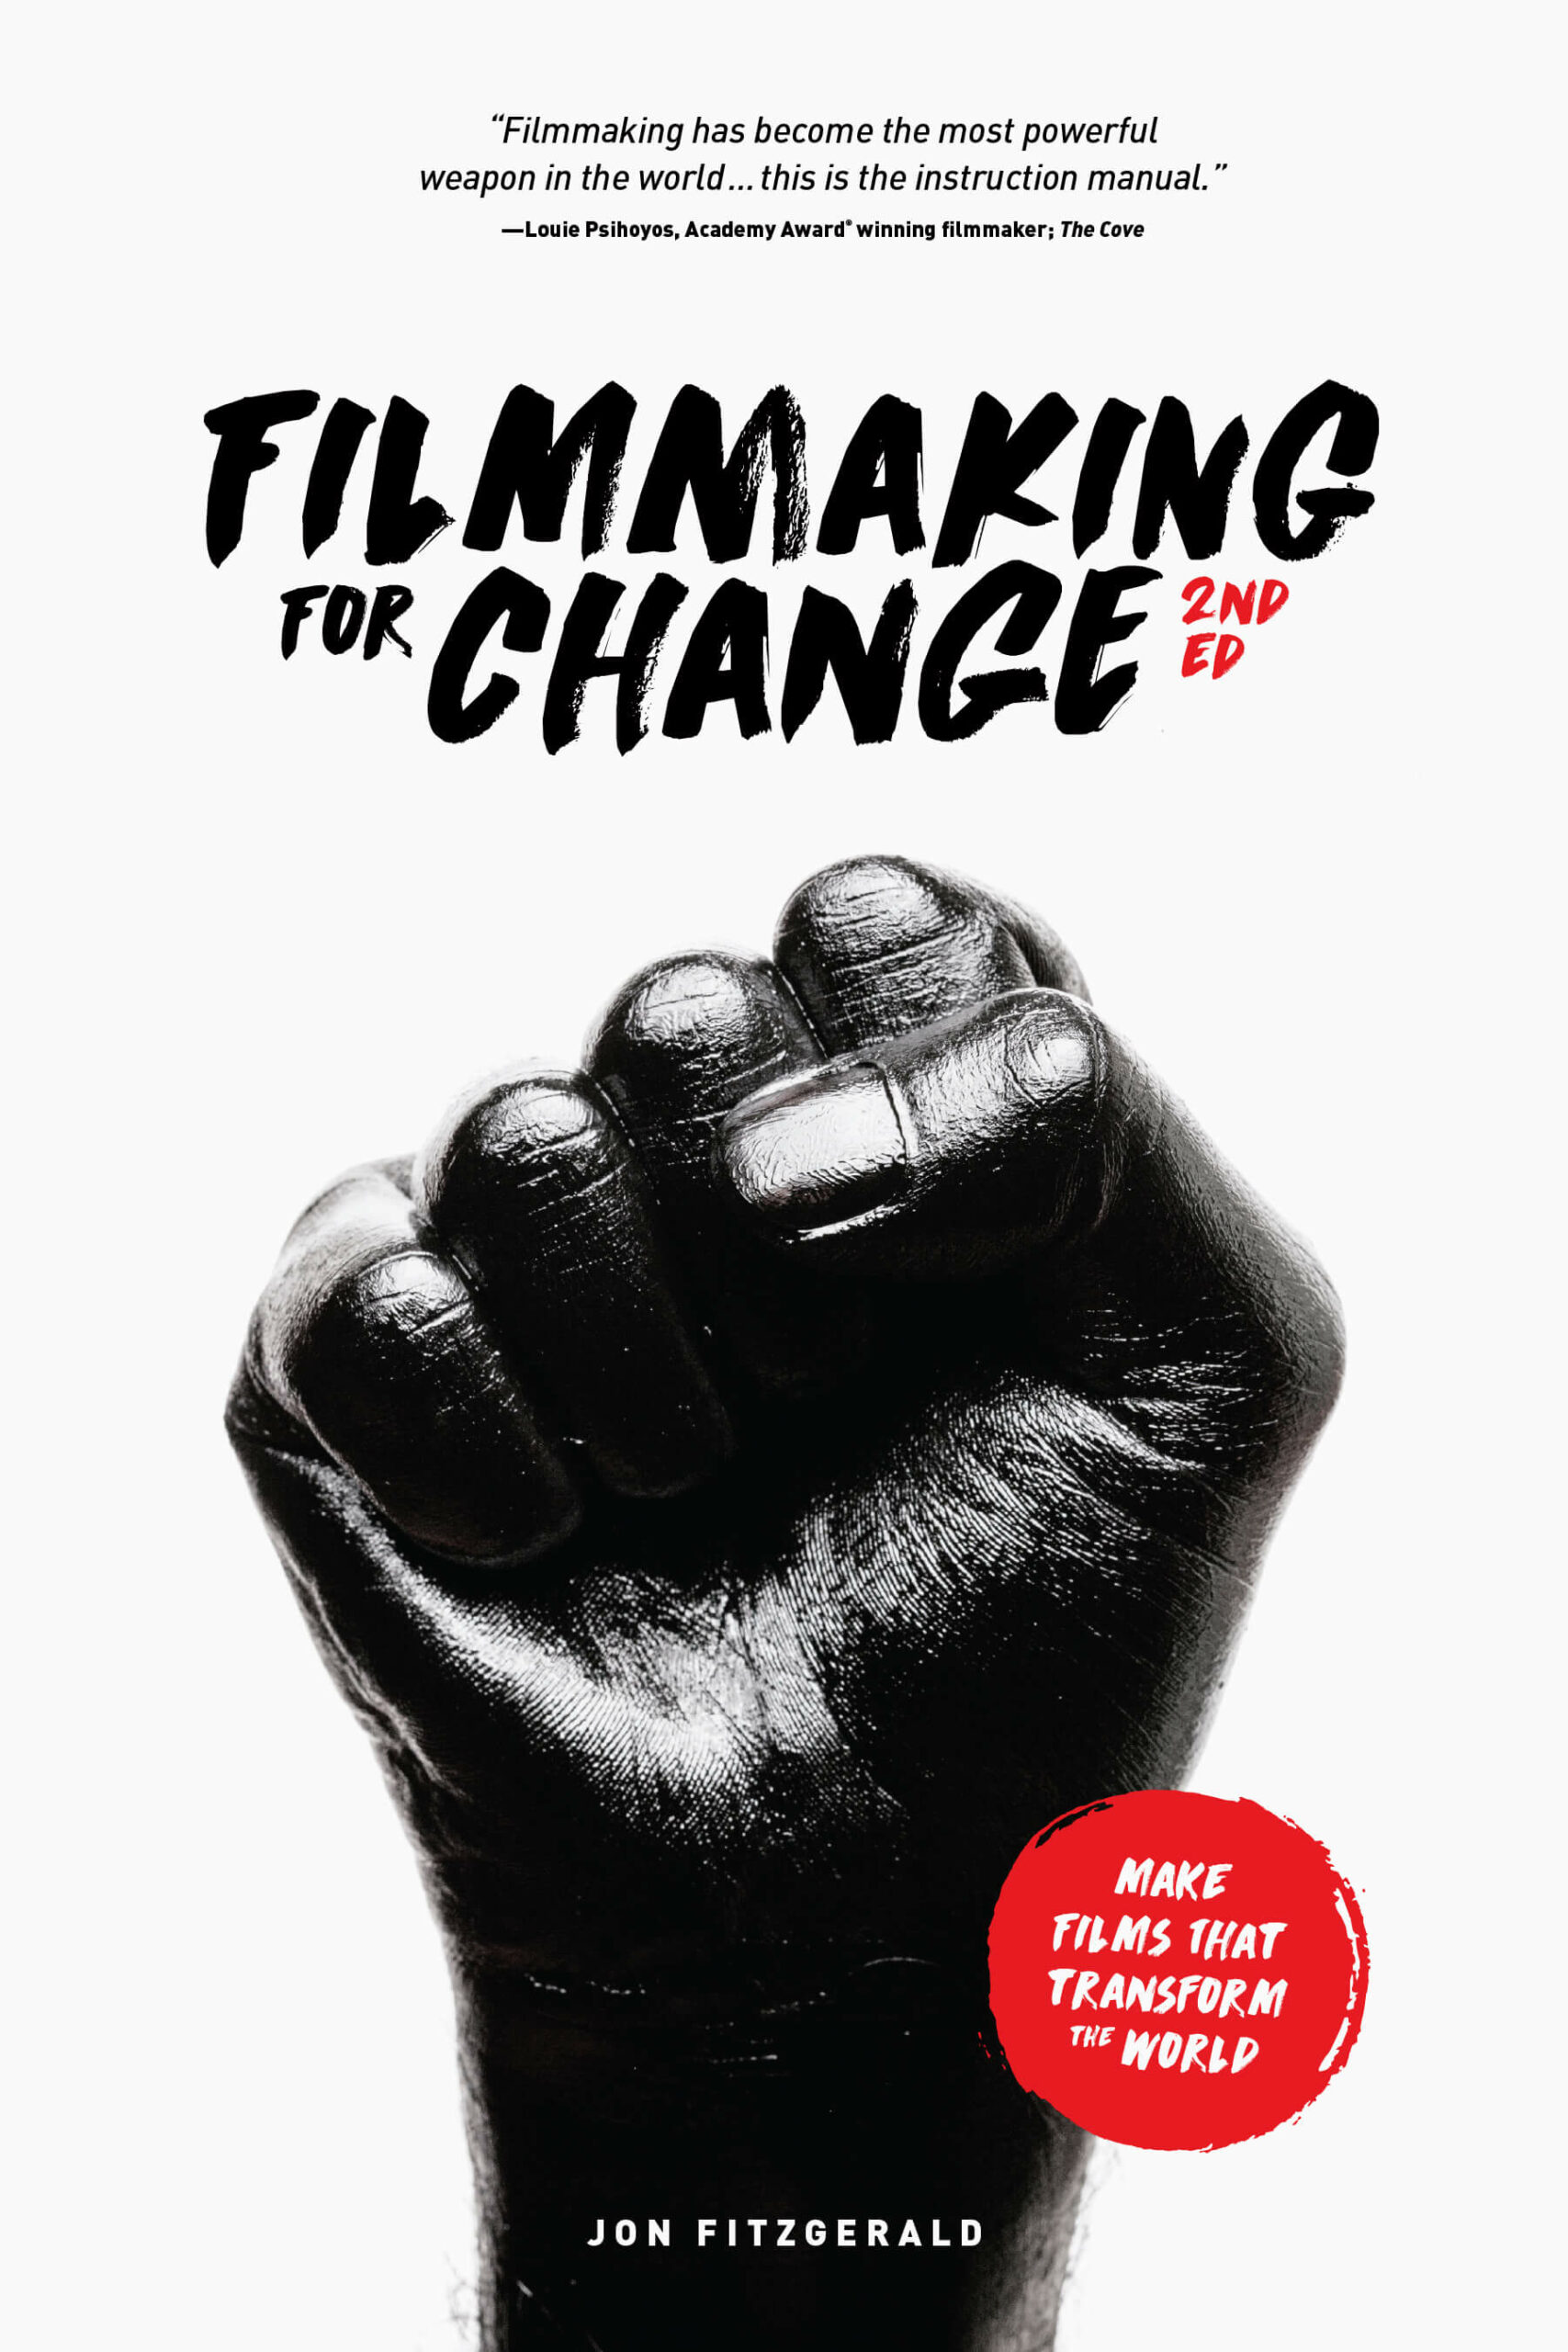 Filmmaking for Change, 2nd edition: Make Films that Transform the World